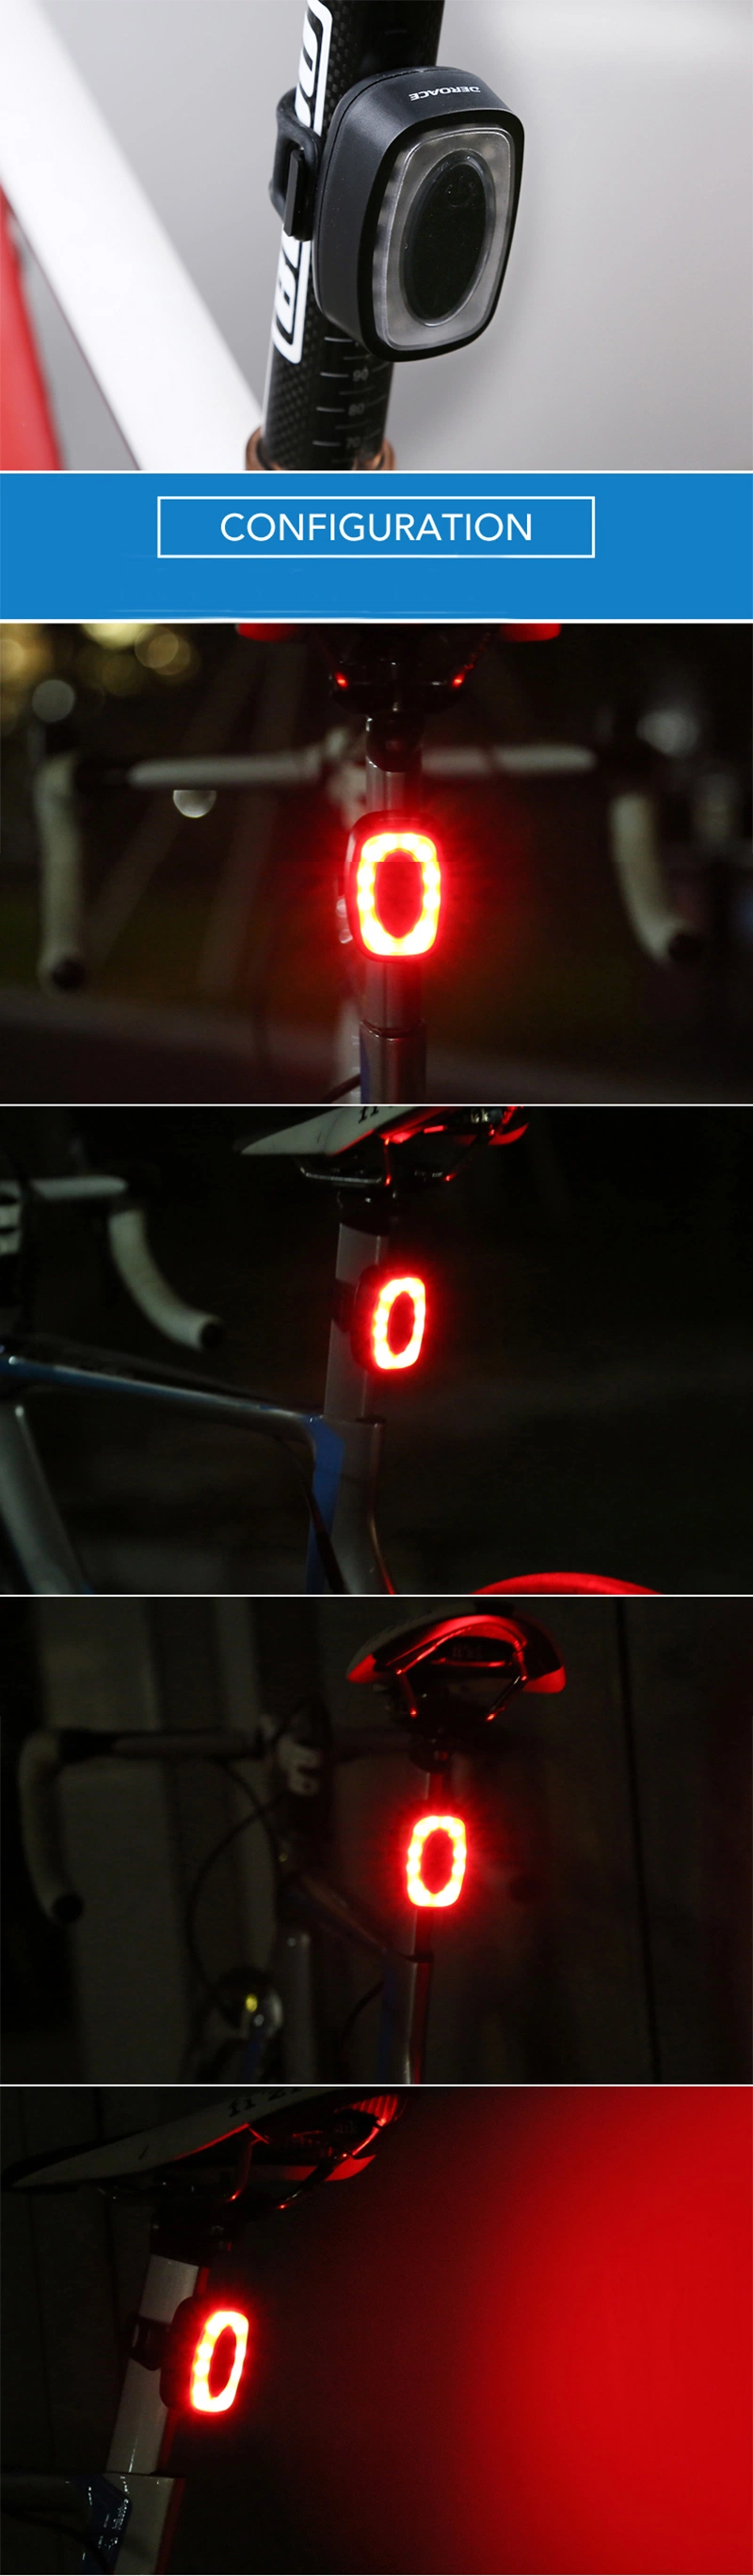 Hot Sale Road Mountain Bicycle Frontbtaillight Emergency Lighitng Waterproof Rechargeable Bike Rear Lamp with Blue and Red Flashing Camping LED Bike Light